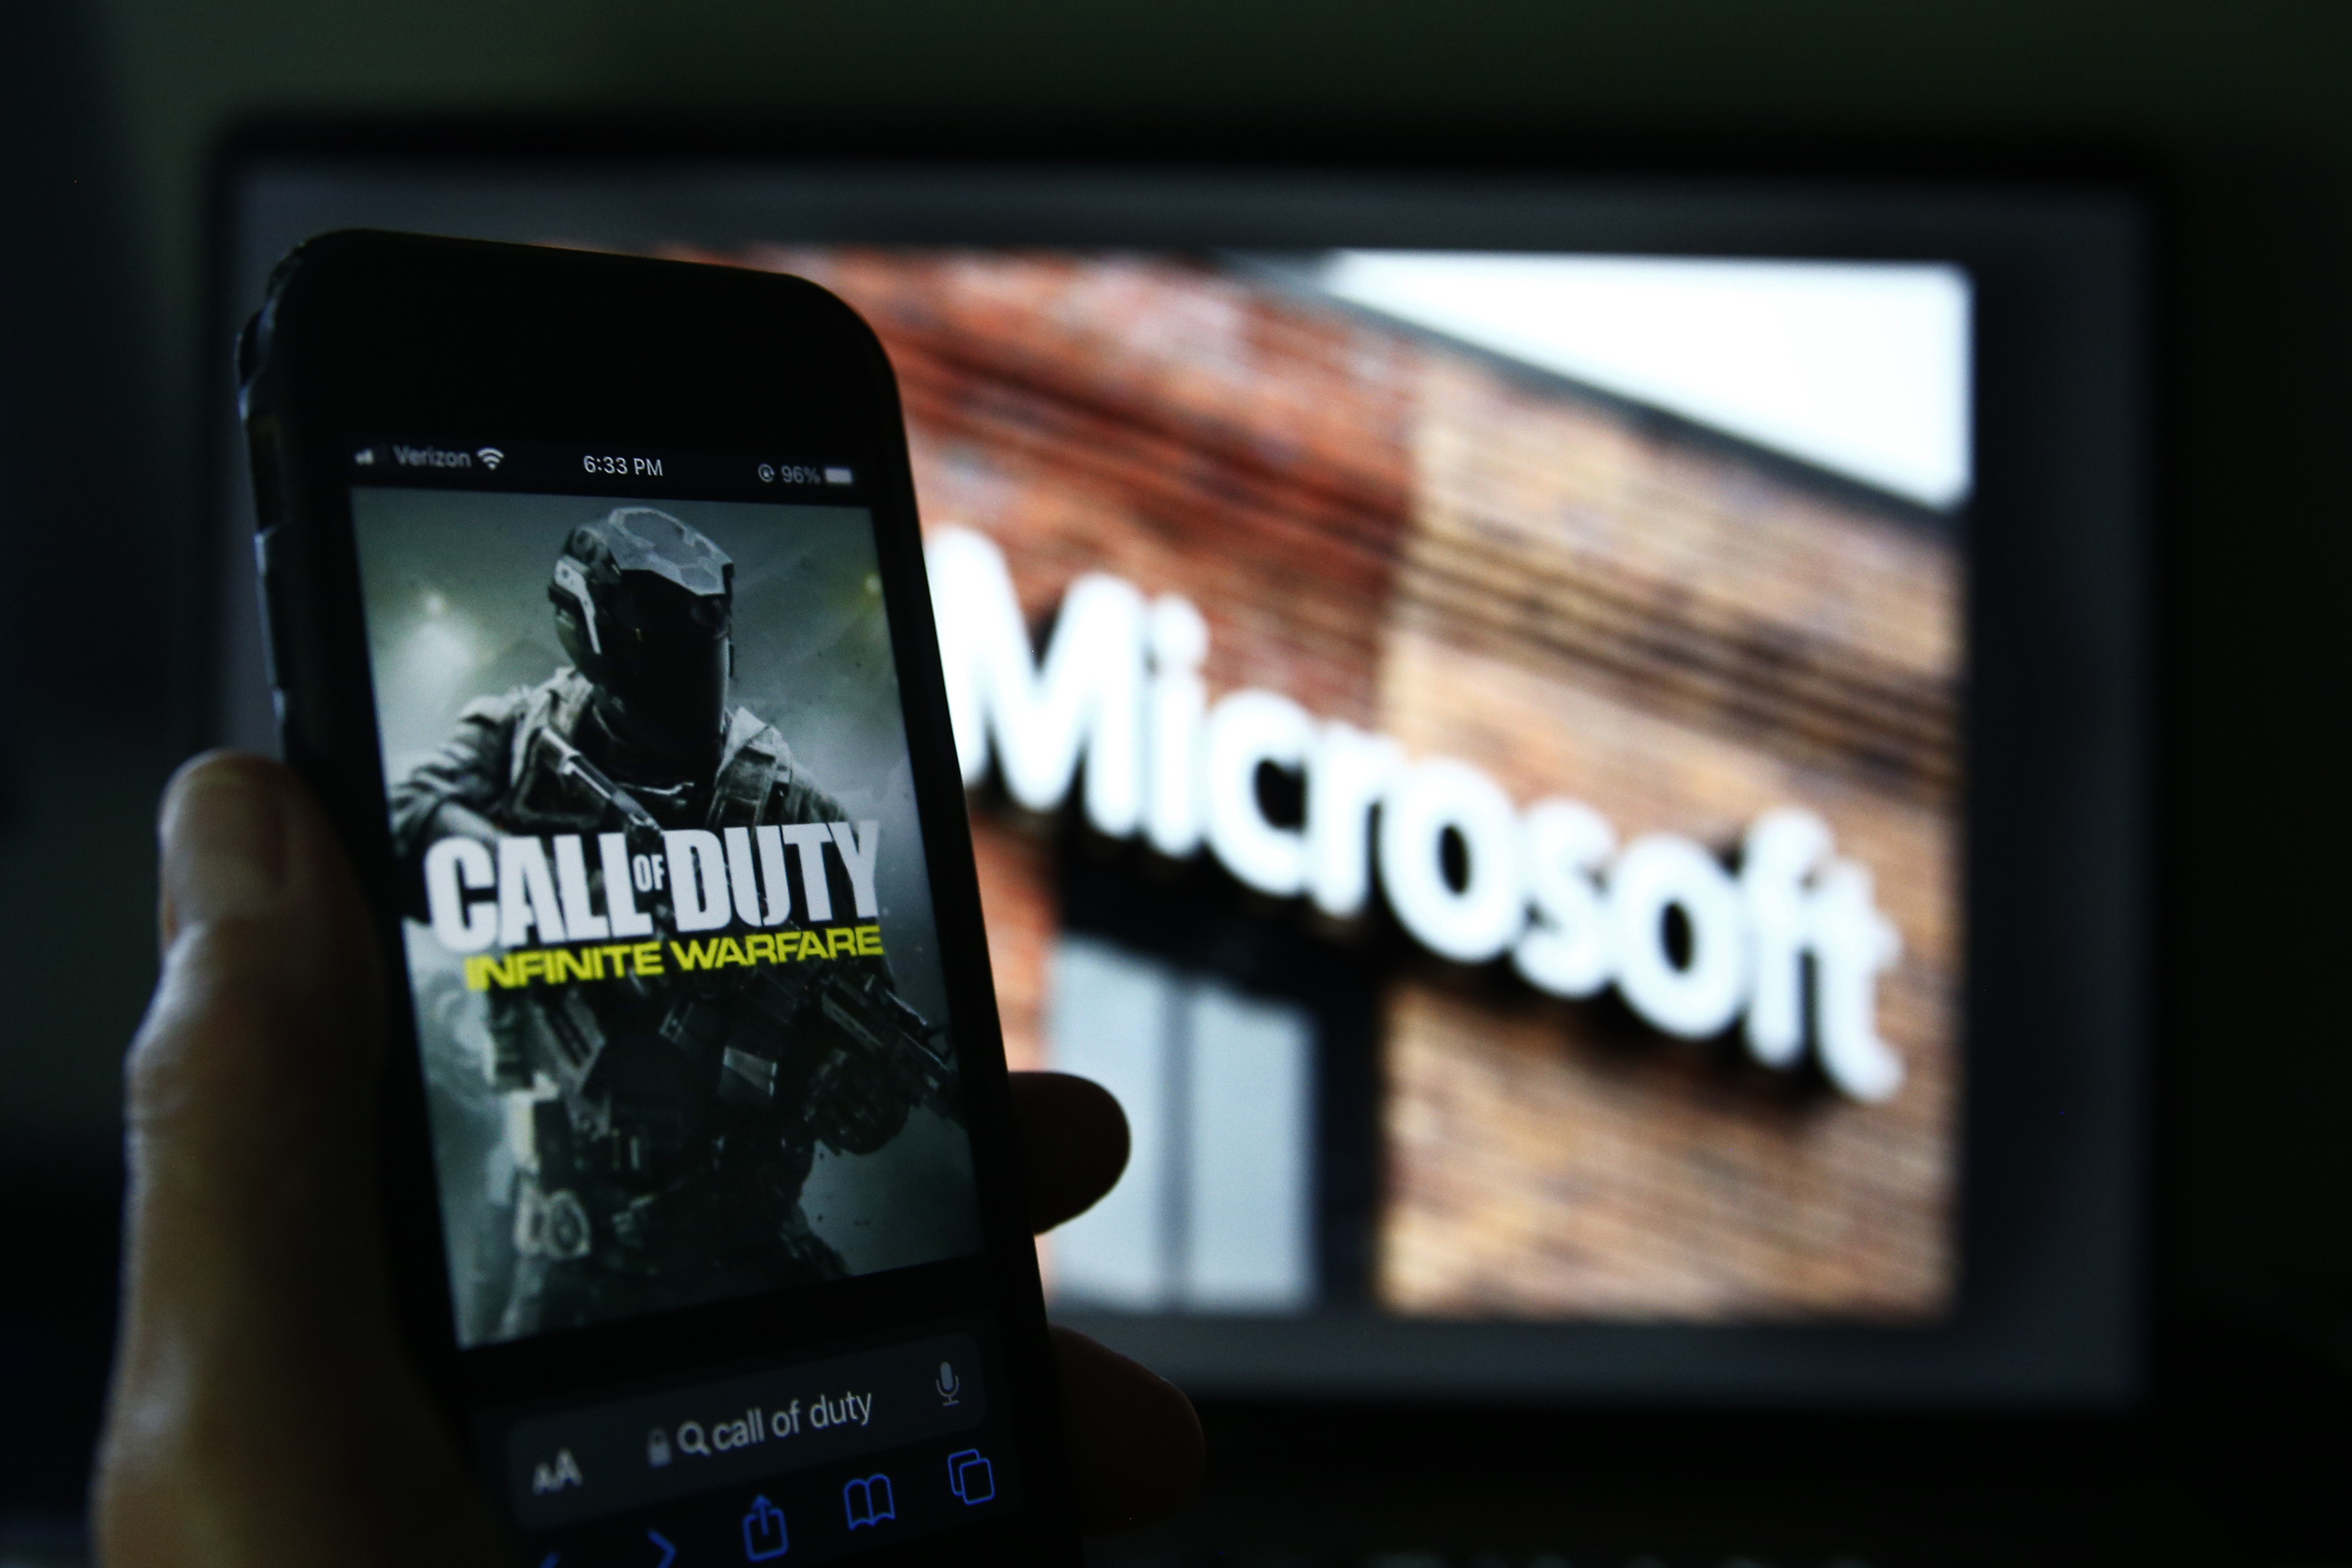 Microsoft completes acquisition of Activision Blizzard after 21